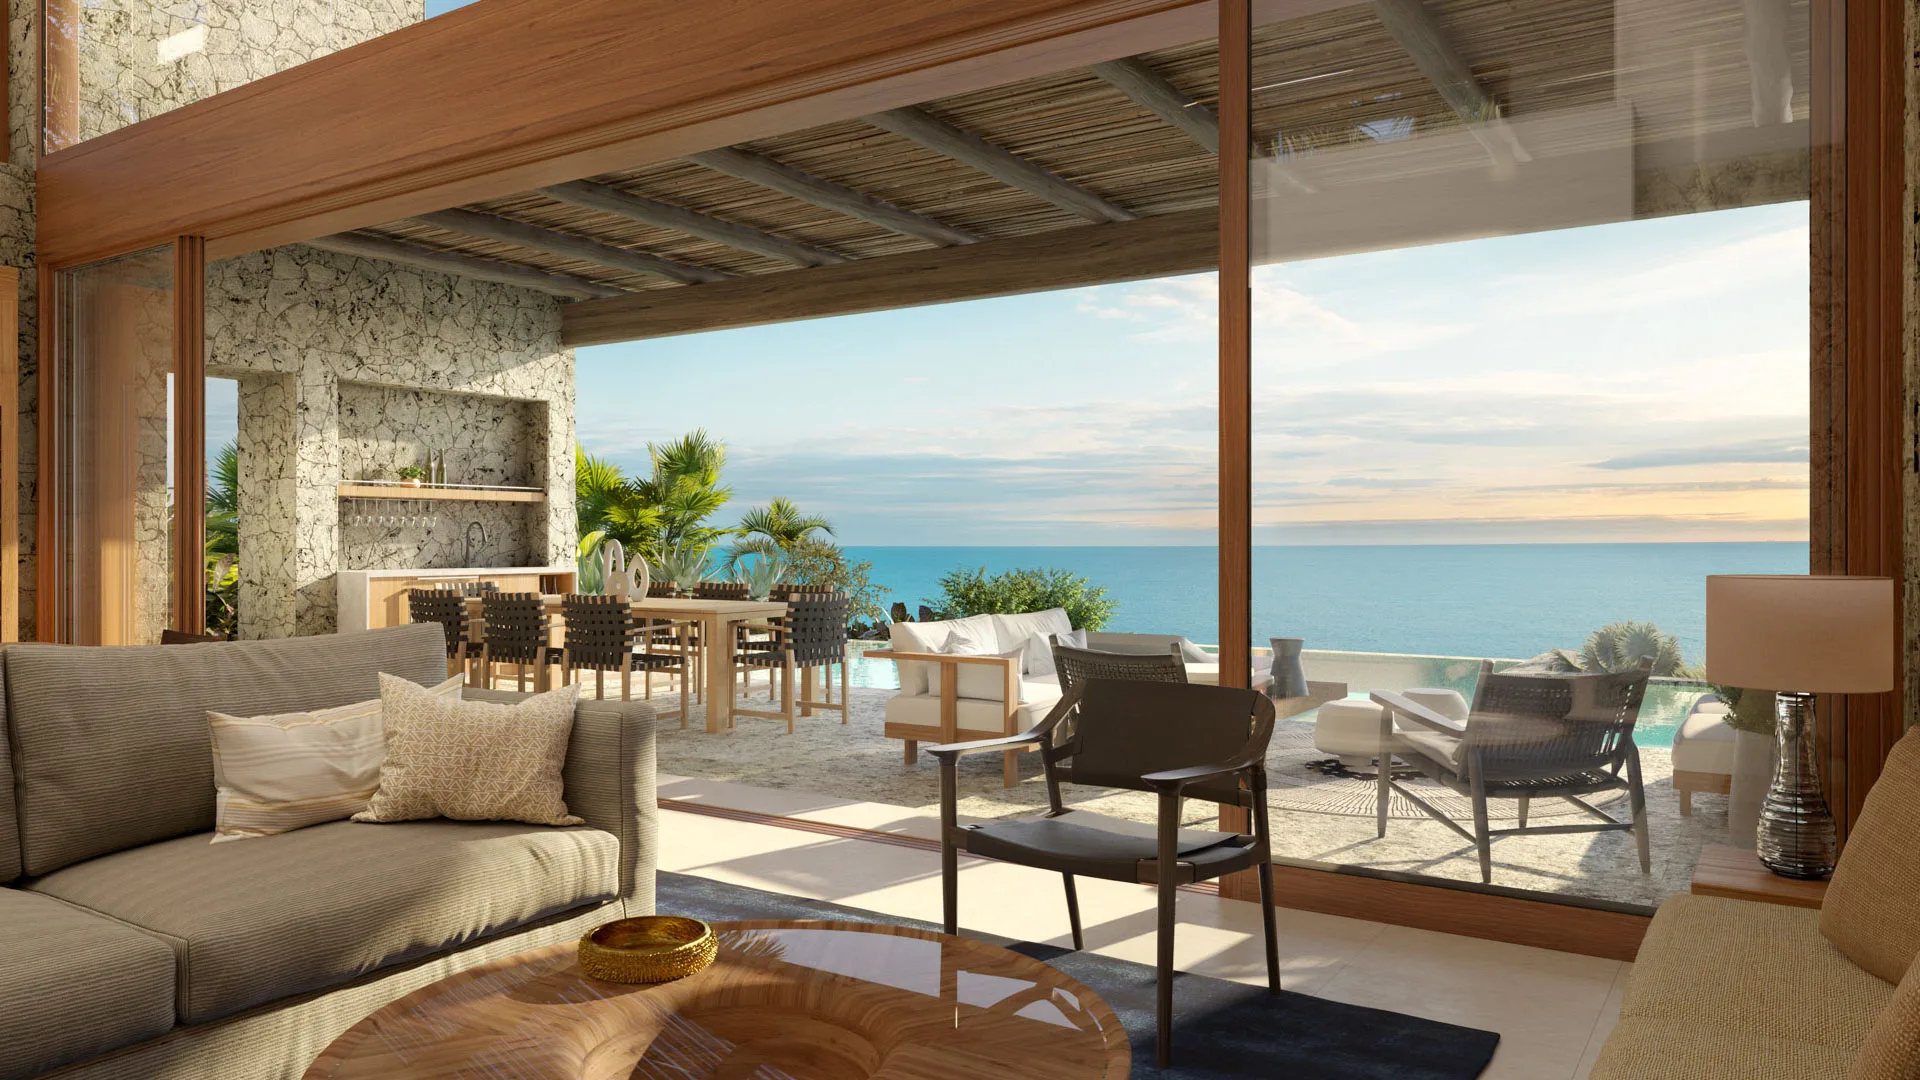 Beautiful terrace at The Strand - luxury Caribbean real estate